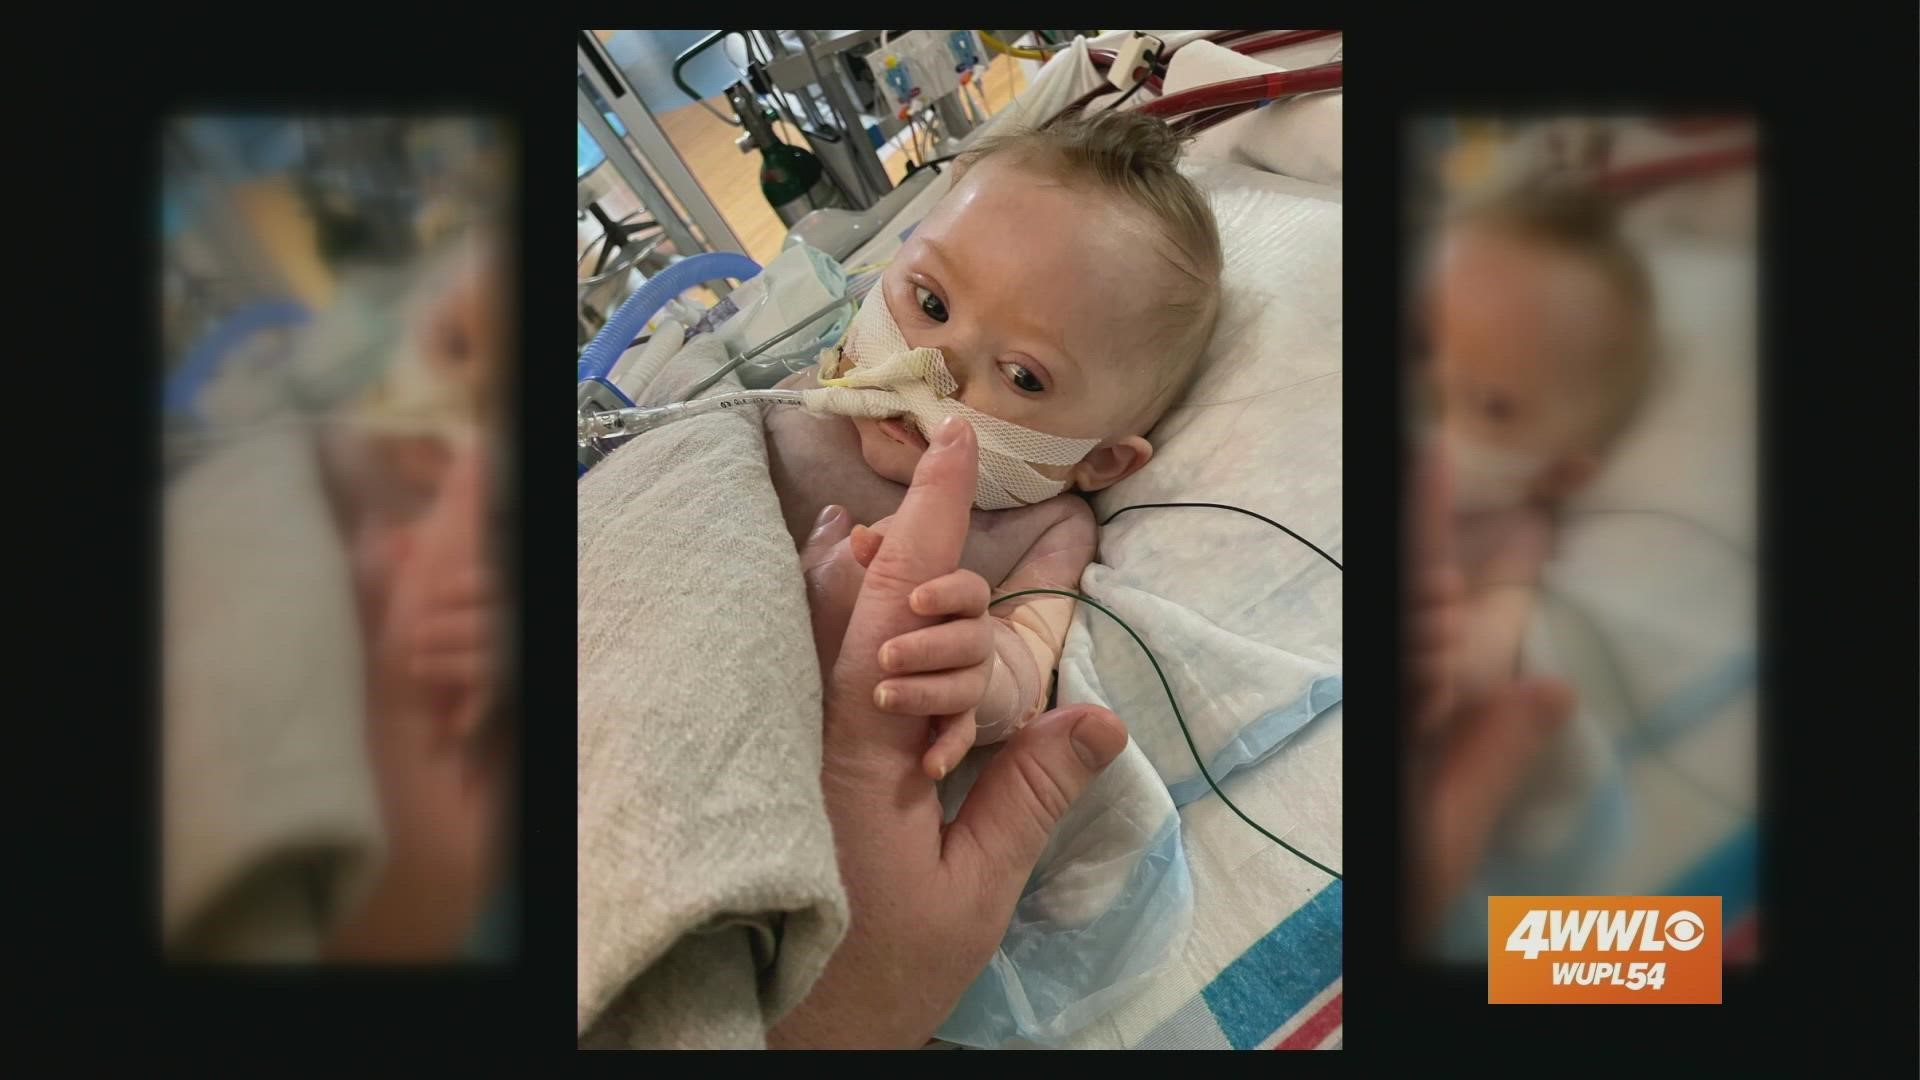 At seven months, Everett Mark McGregor passed away. But his family decided to make this Thanksgiving special in his honor.